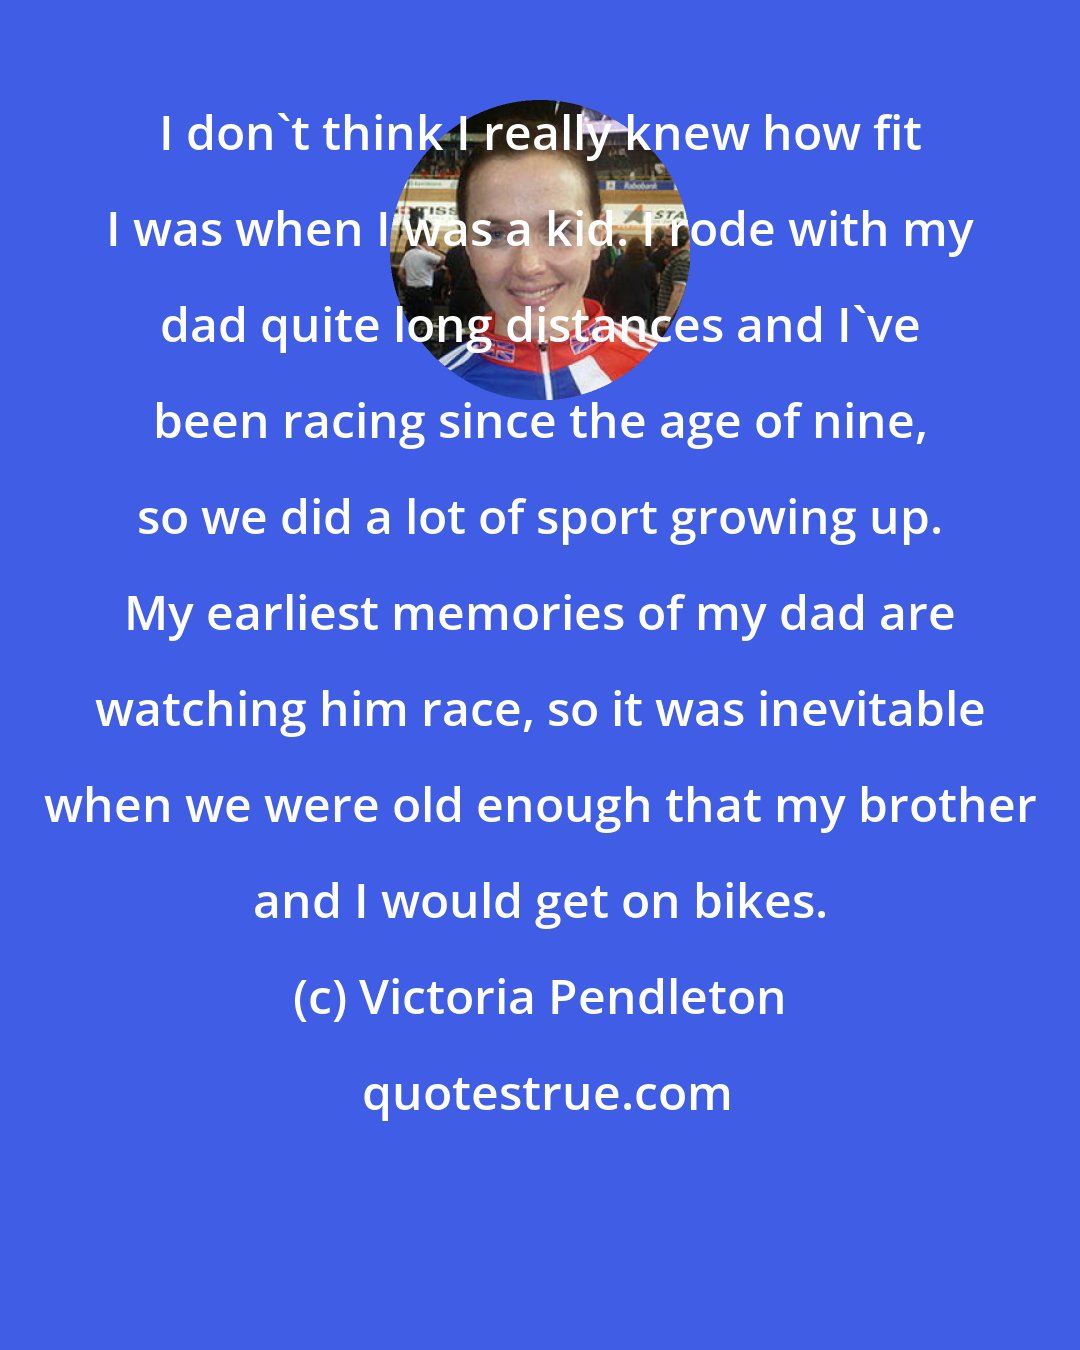 Victoria Pendleton: I don't think I really knew how fit I was when I was a kid. I rode with my dad quite long distances and I've been racing since the age of nine, so we did a lot of sport growing up. My earliest memories of my dad are watching him race, so it was inevitable when we were old enough that my brother and I would get on bikes.